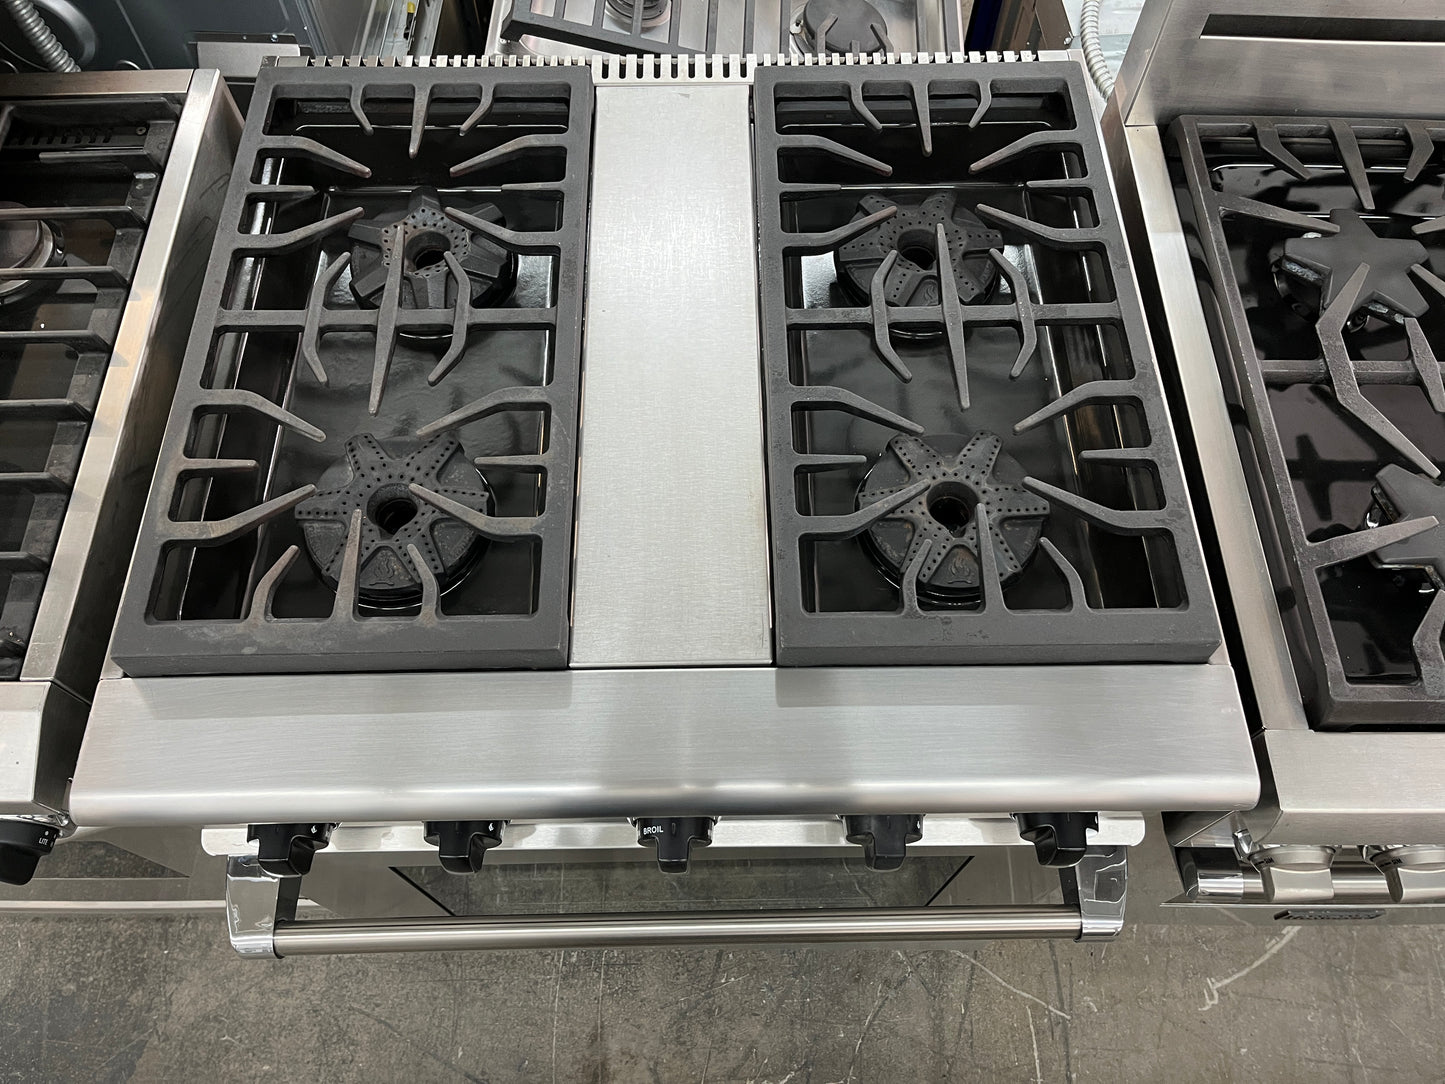 30 Inch American Range Gas ARROB-430 4-Burner,Convection Oven, Stainless Steel 444100